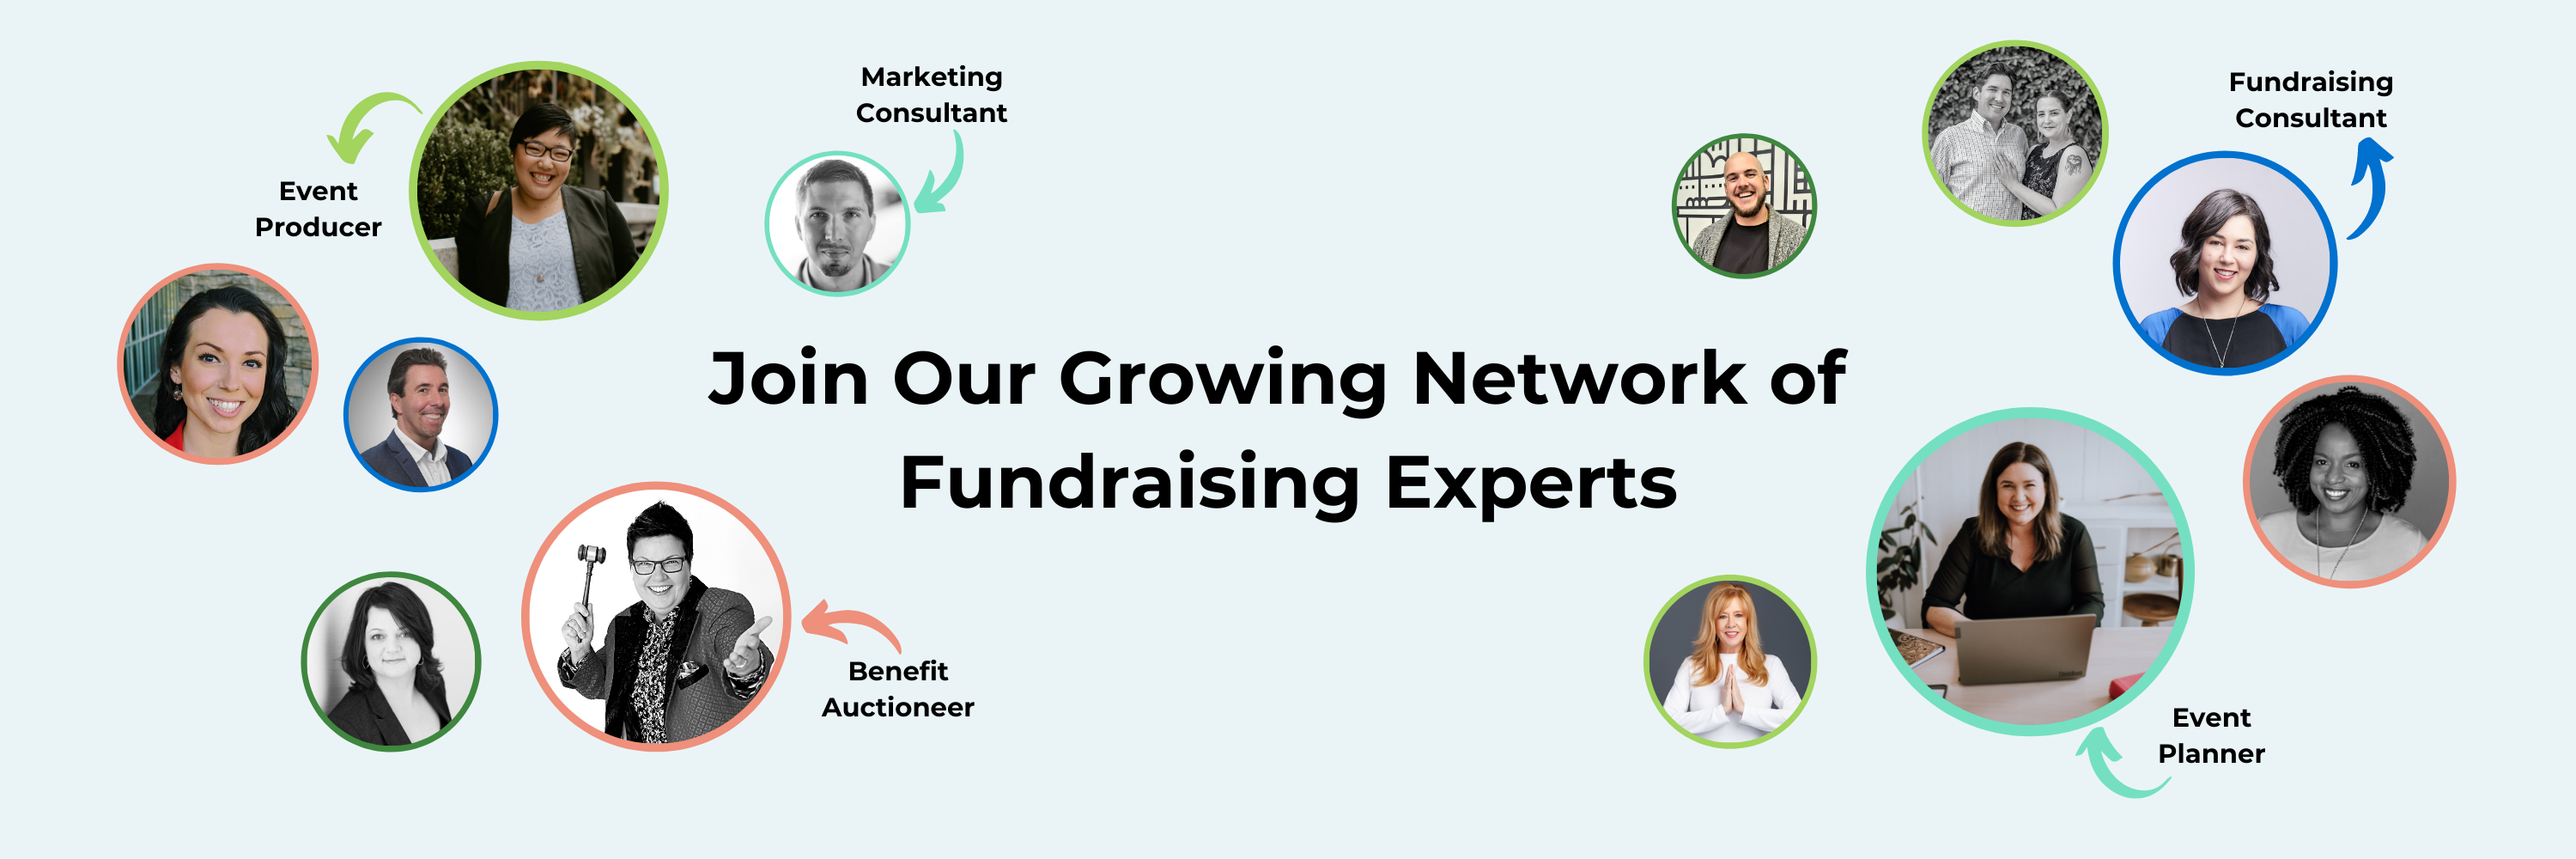 Join Our Growing Network of Fundraising Experts